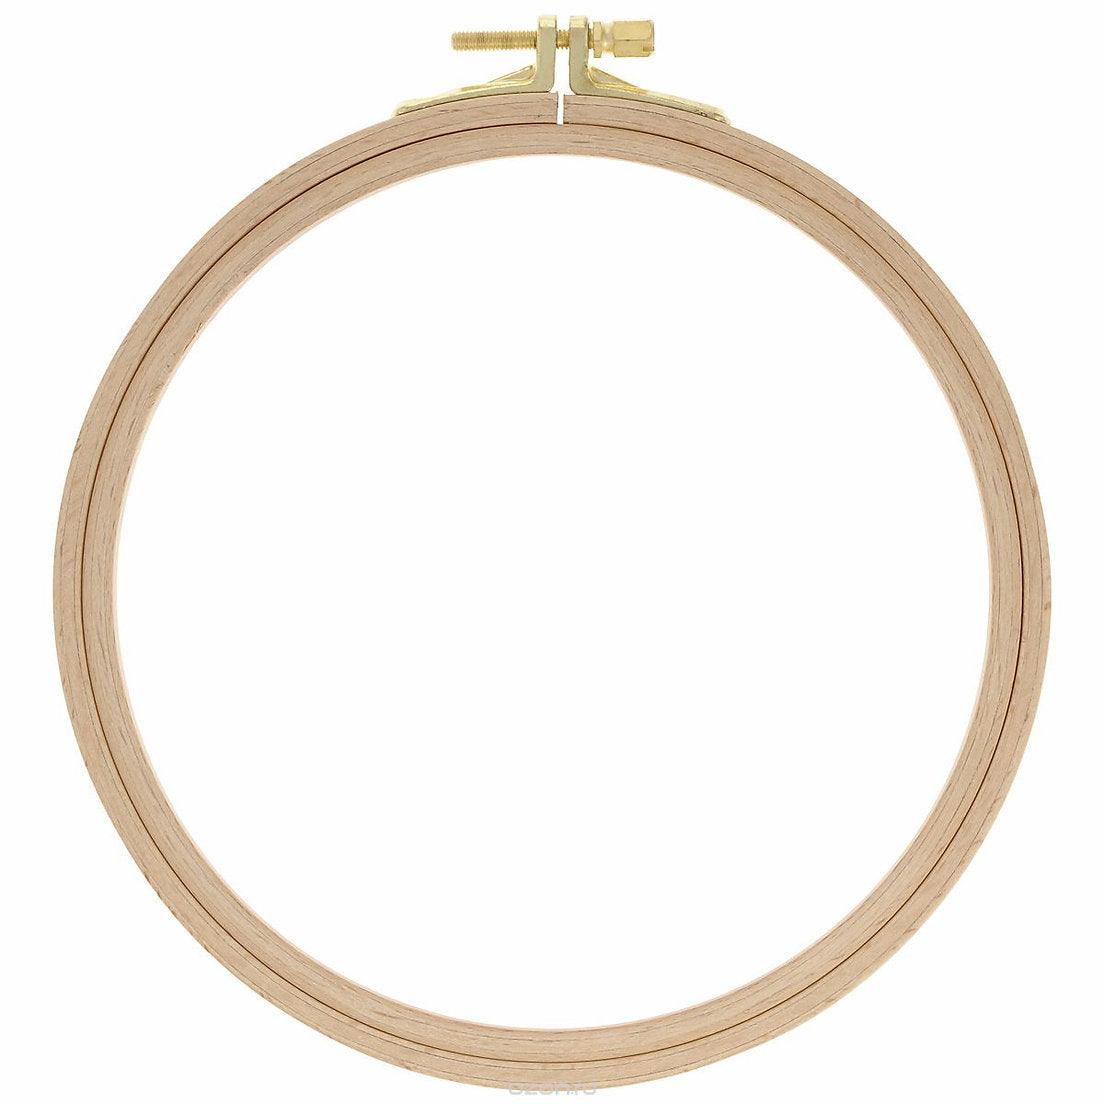 GuoFa wooden 7inch embroidery hoops,2 pieces natural beech wood embroidery  frame, decorative hanging cross stitch hoops frames for